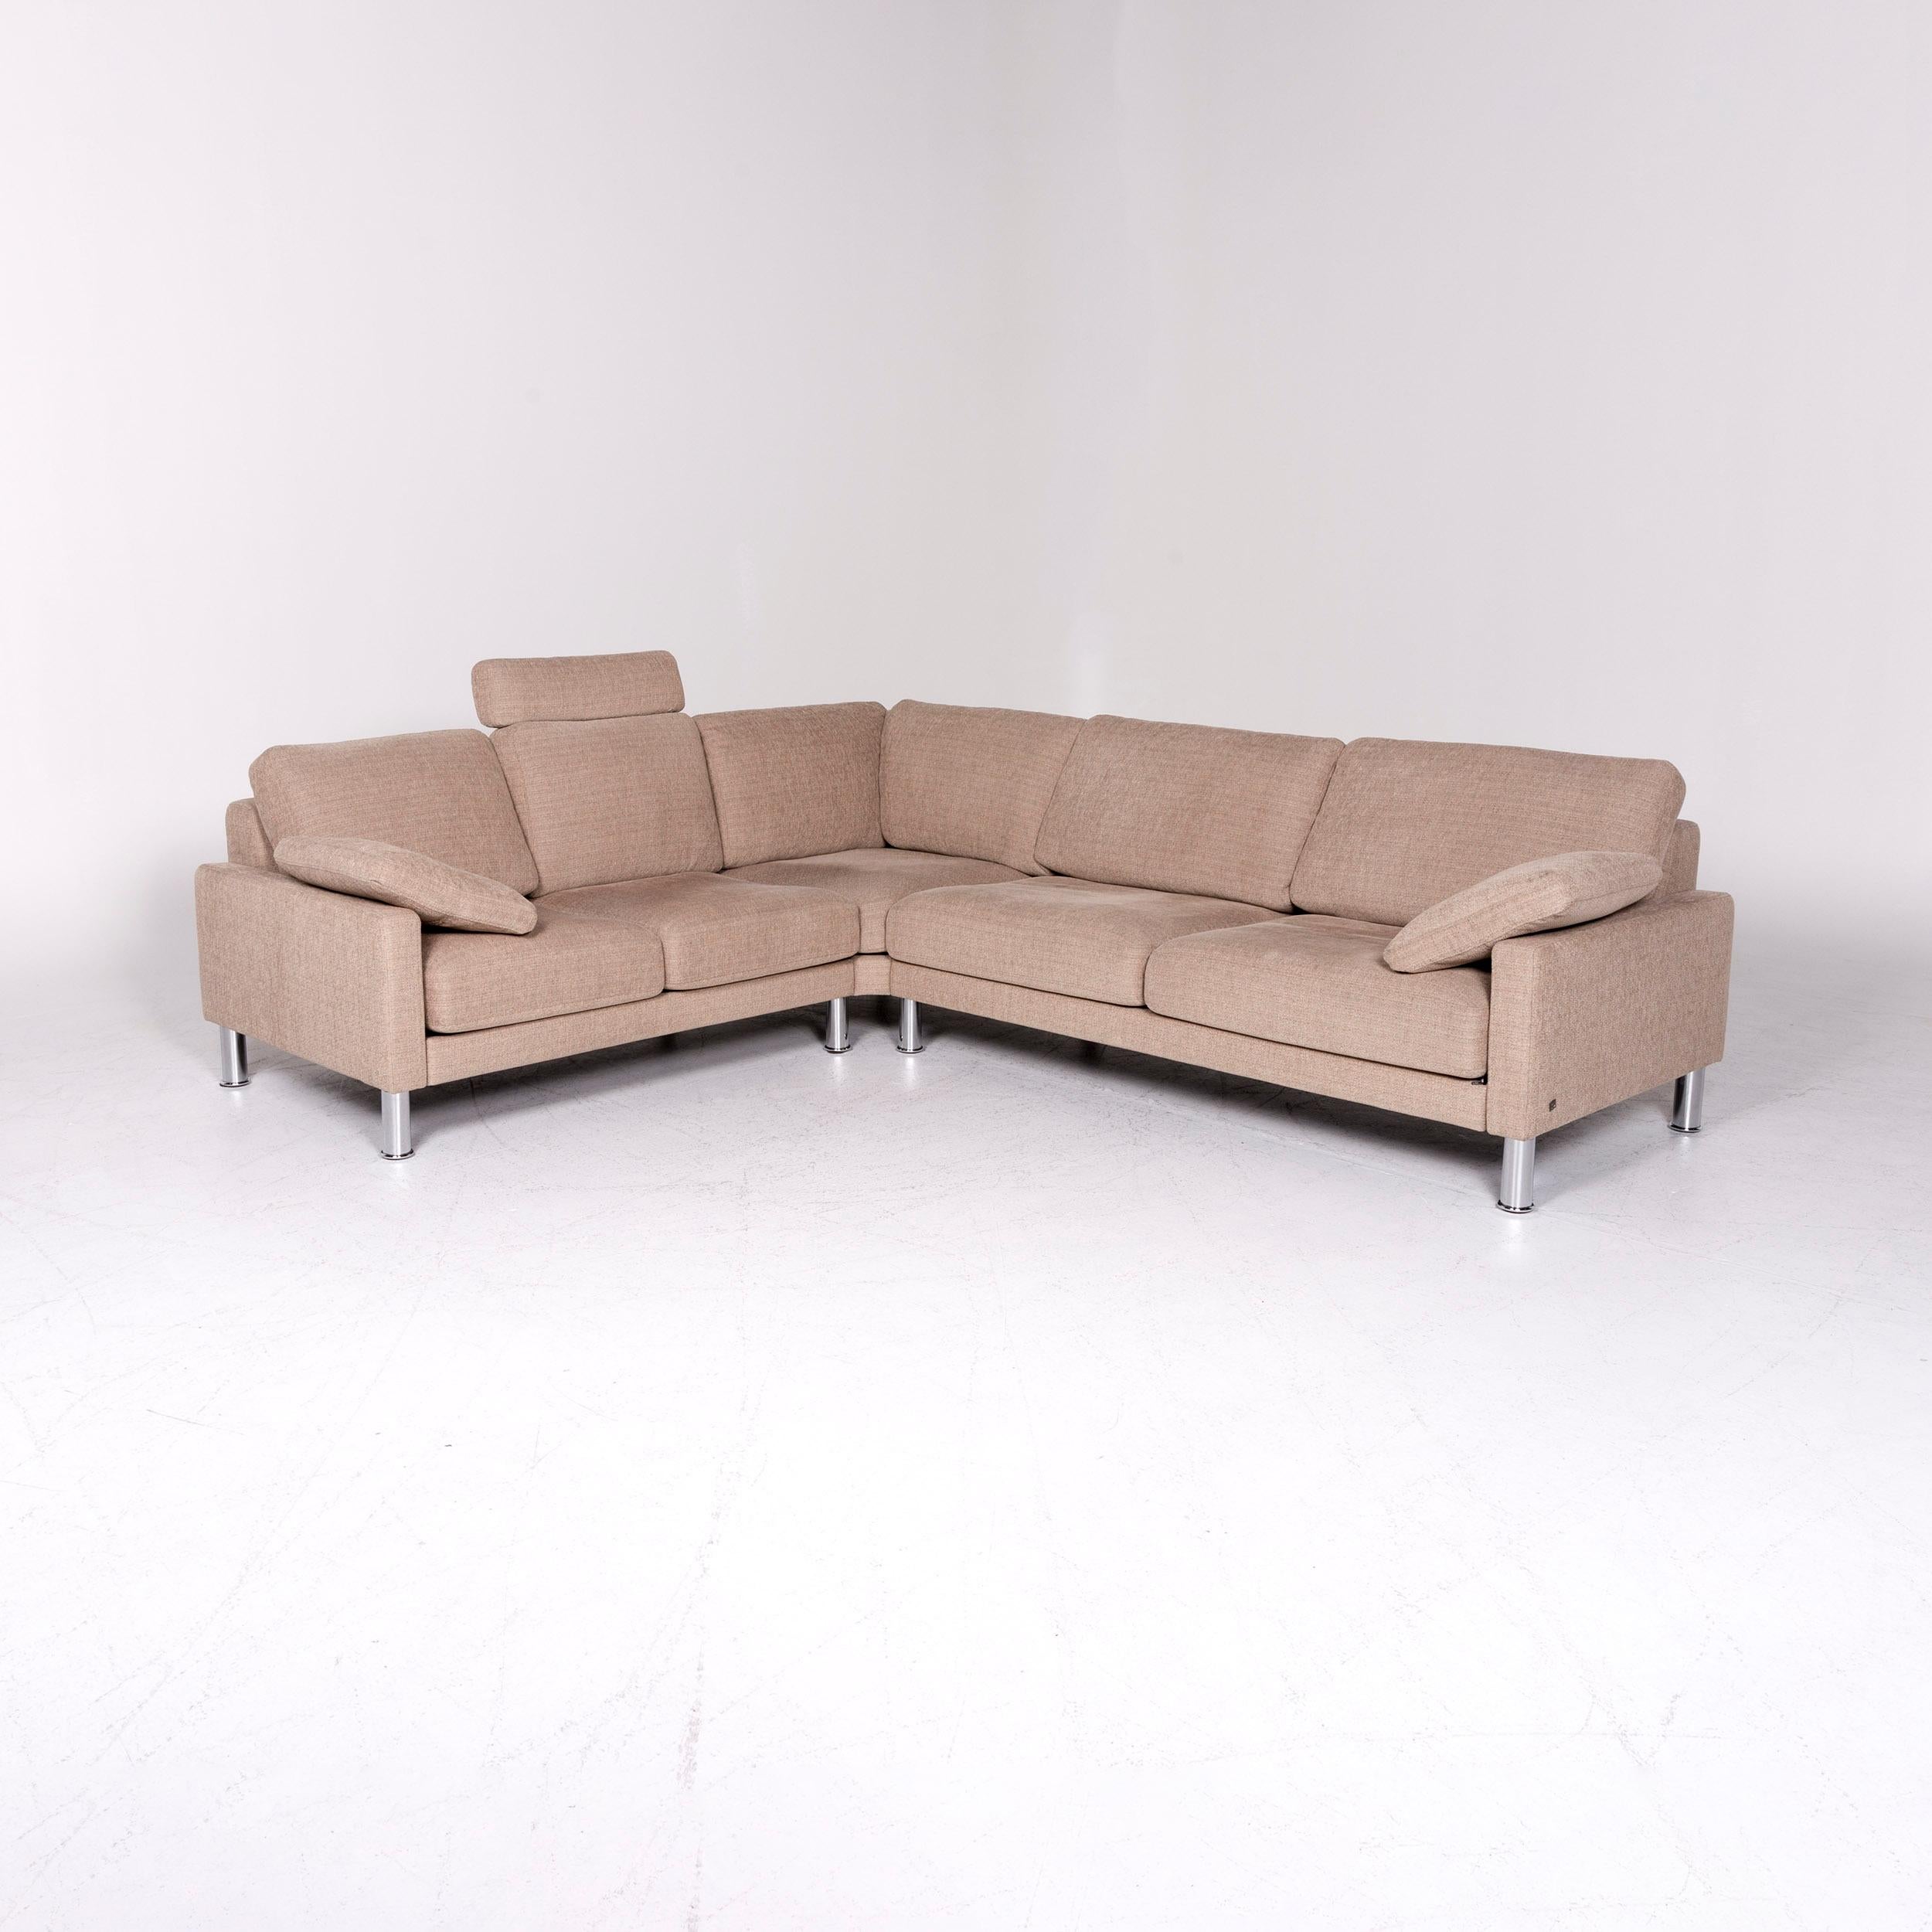 We bring to you a Rolf Benz Ego designer fabric sofa beige corner sofa couch.

Product measurements in centimeters:

Depth 235
Width 277
Height 101
Seat-height 46
Rest-height 68
Seat-depth 54
Seat-width 225
Back-height 40.
    